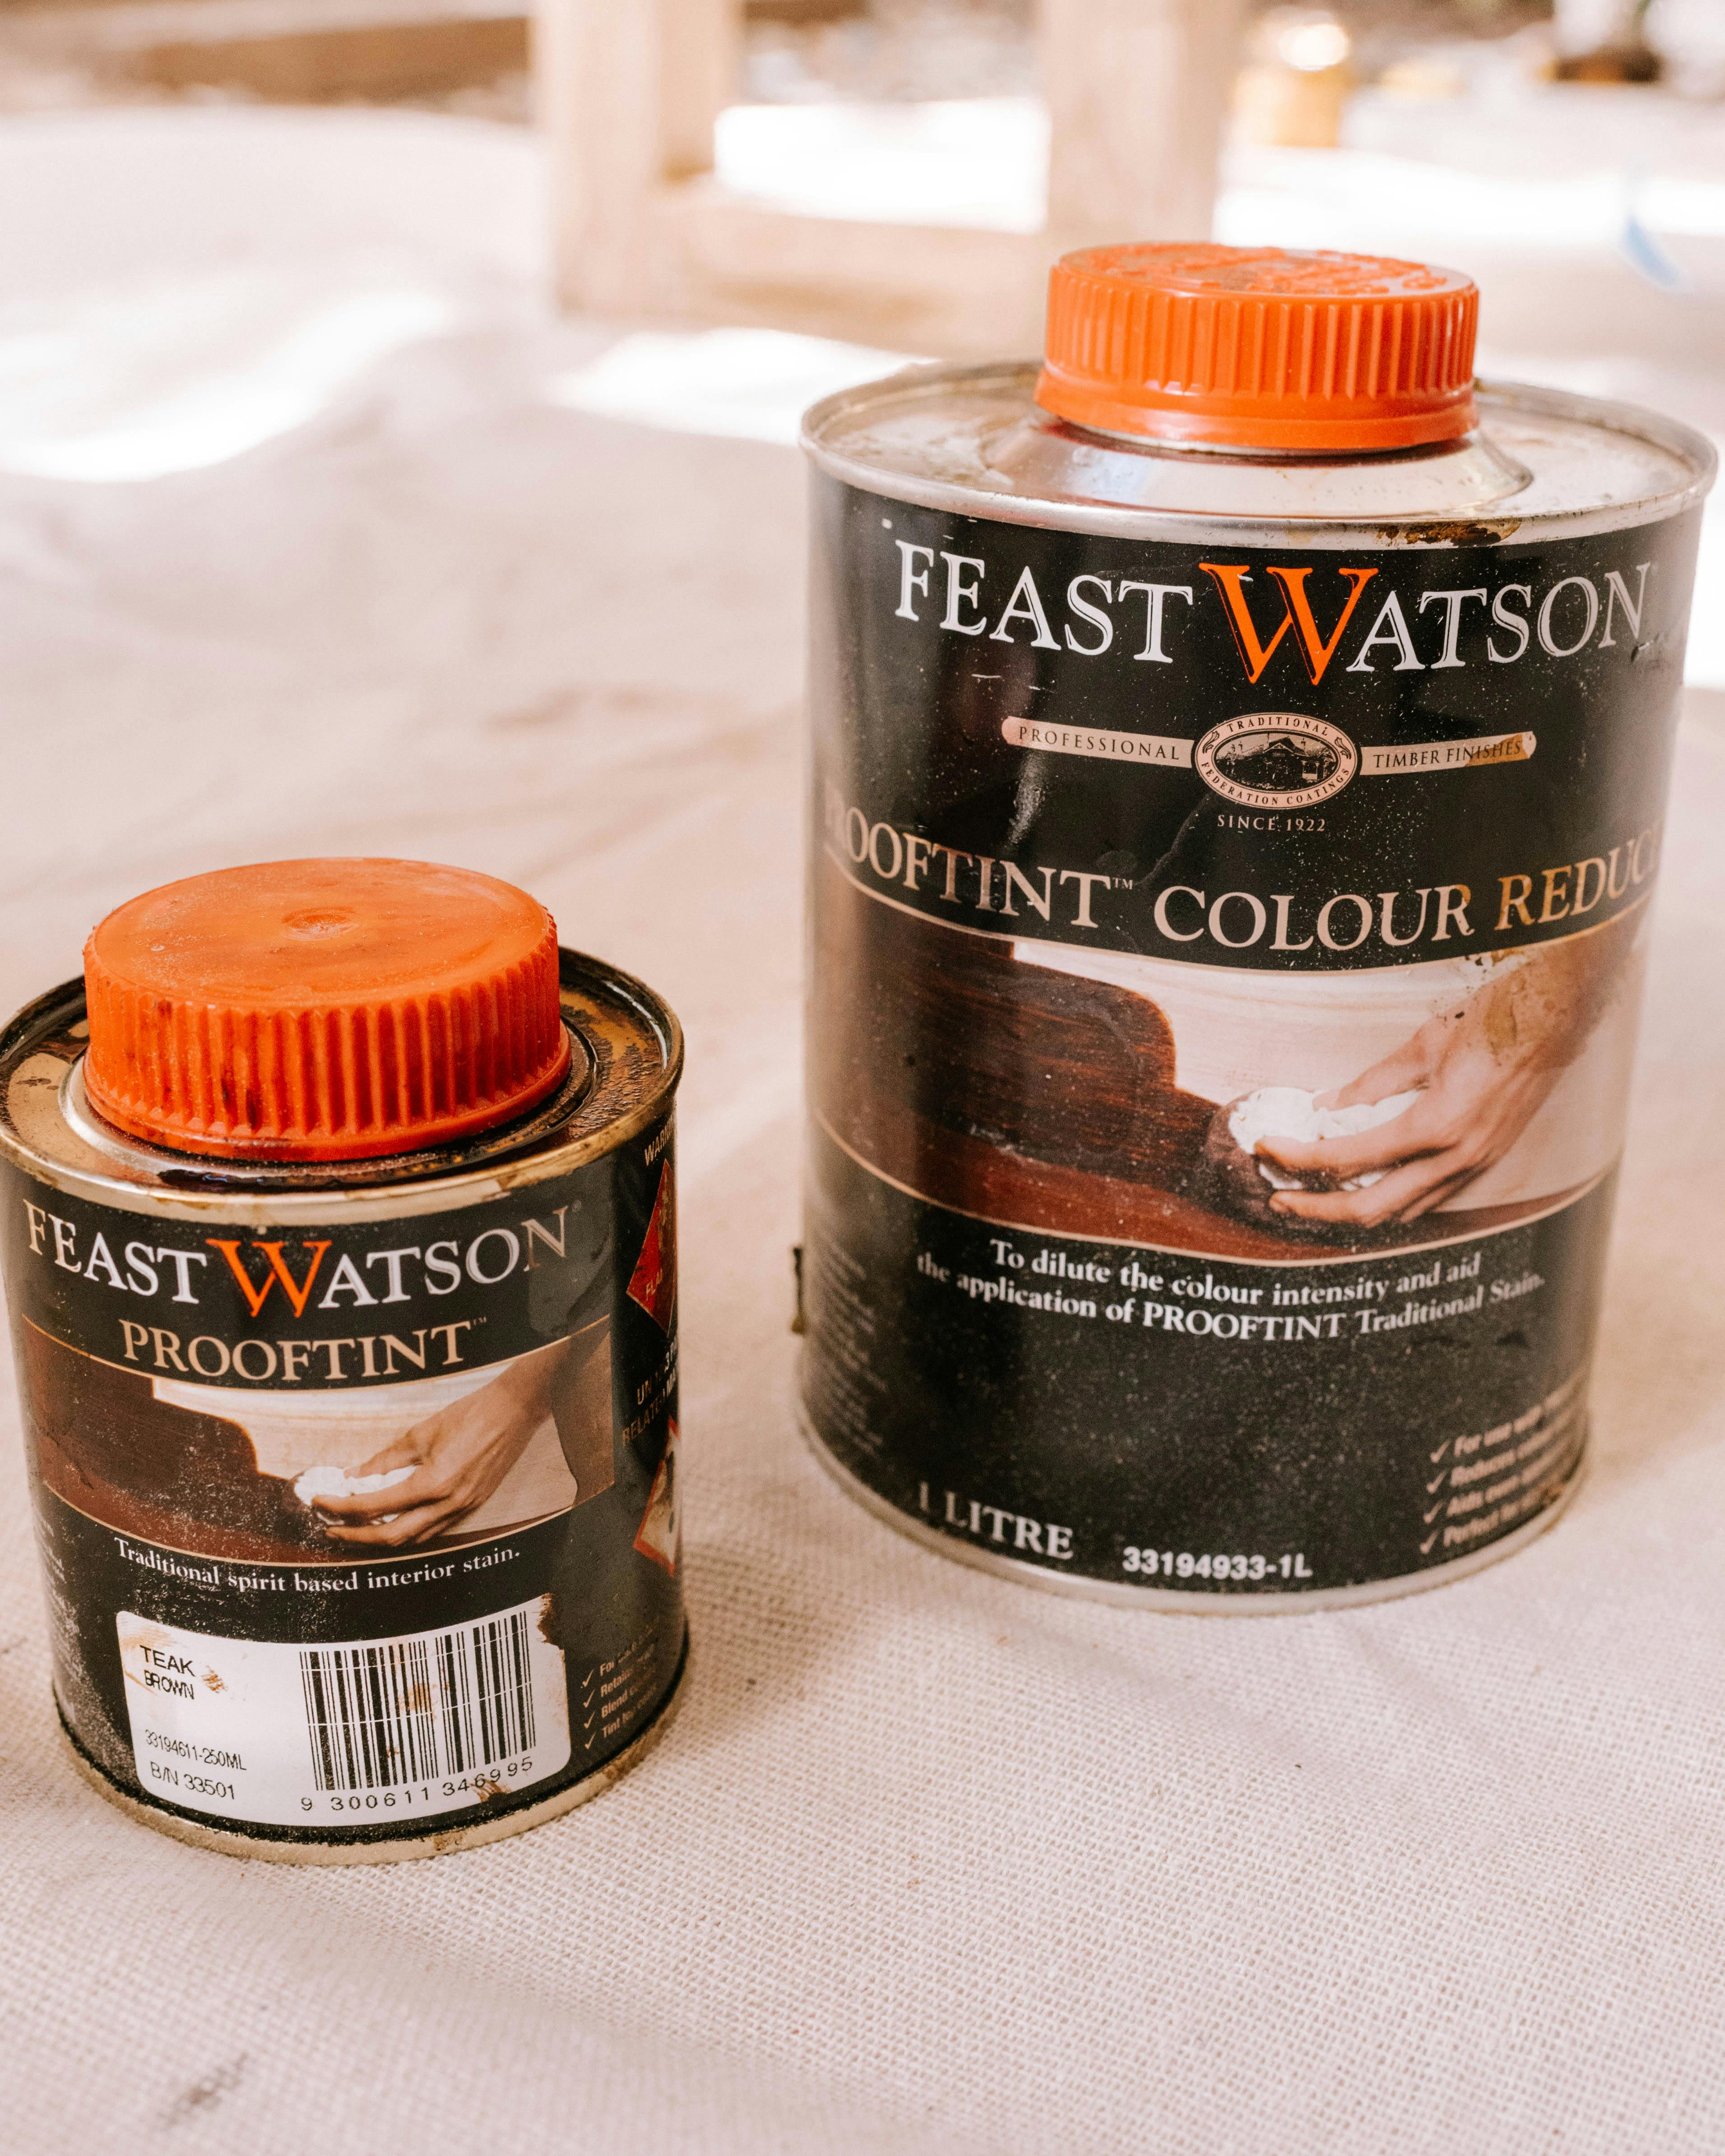 Feast Watson Prooftint and Colour Reducer